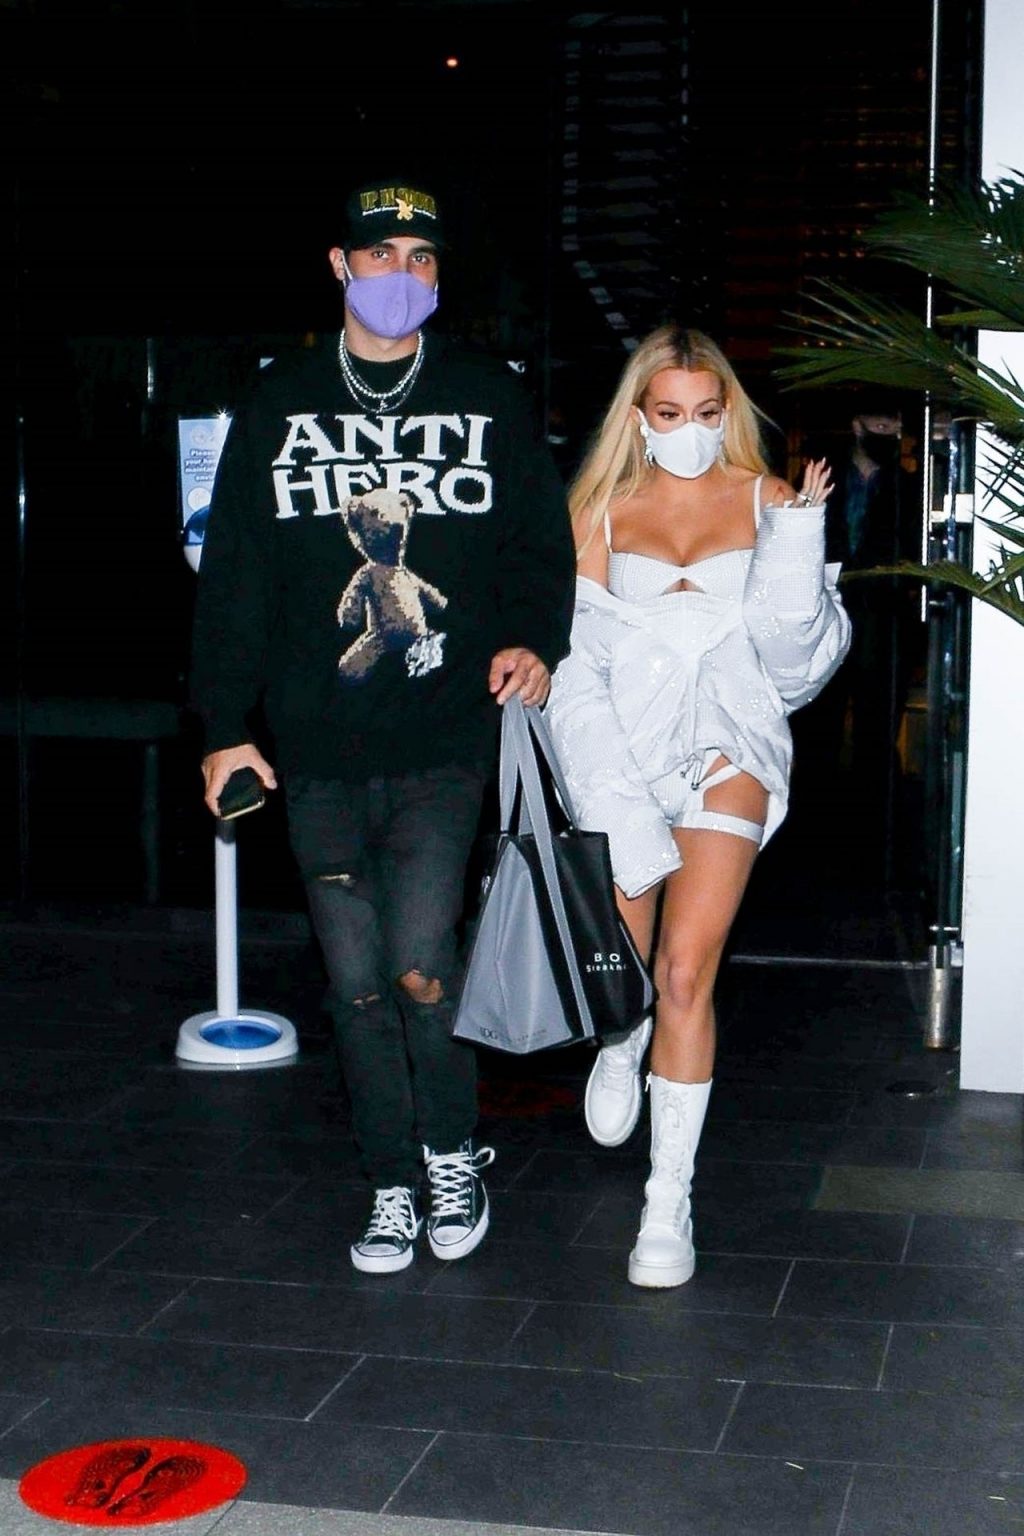 Busty Tana Mongeau Dons All White While Leaving Dinner at BOA (19 Photos)